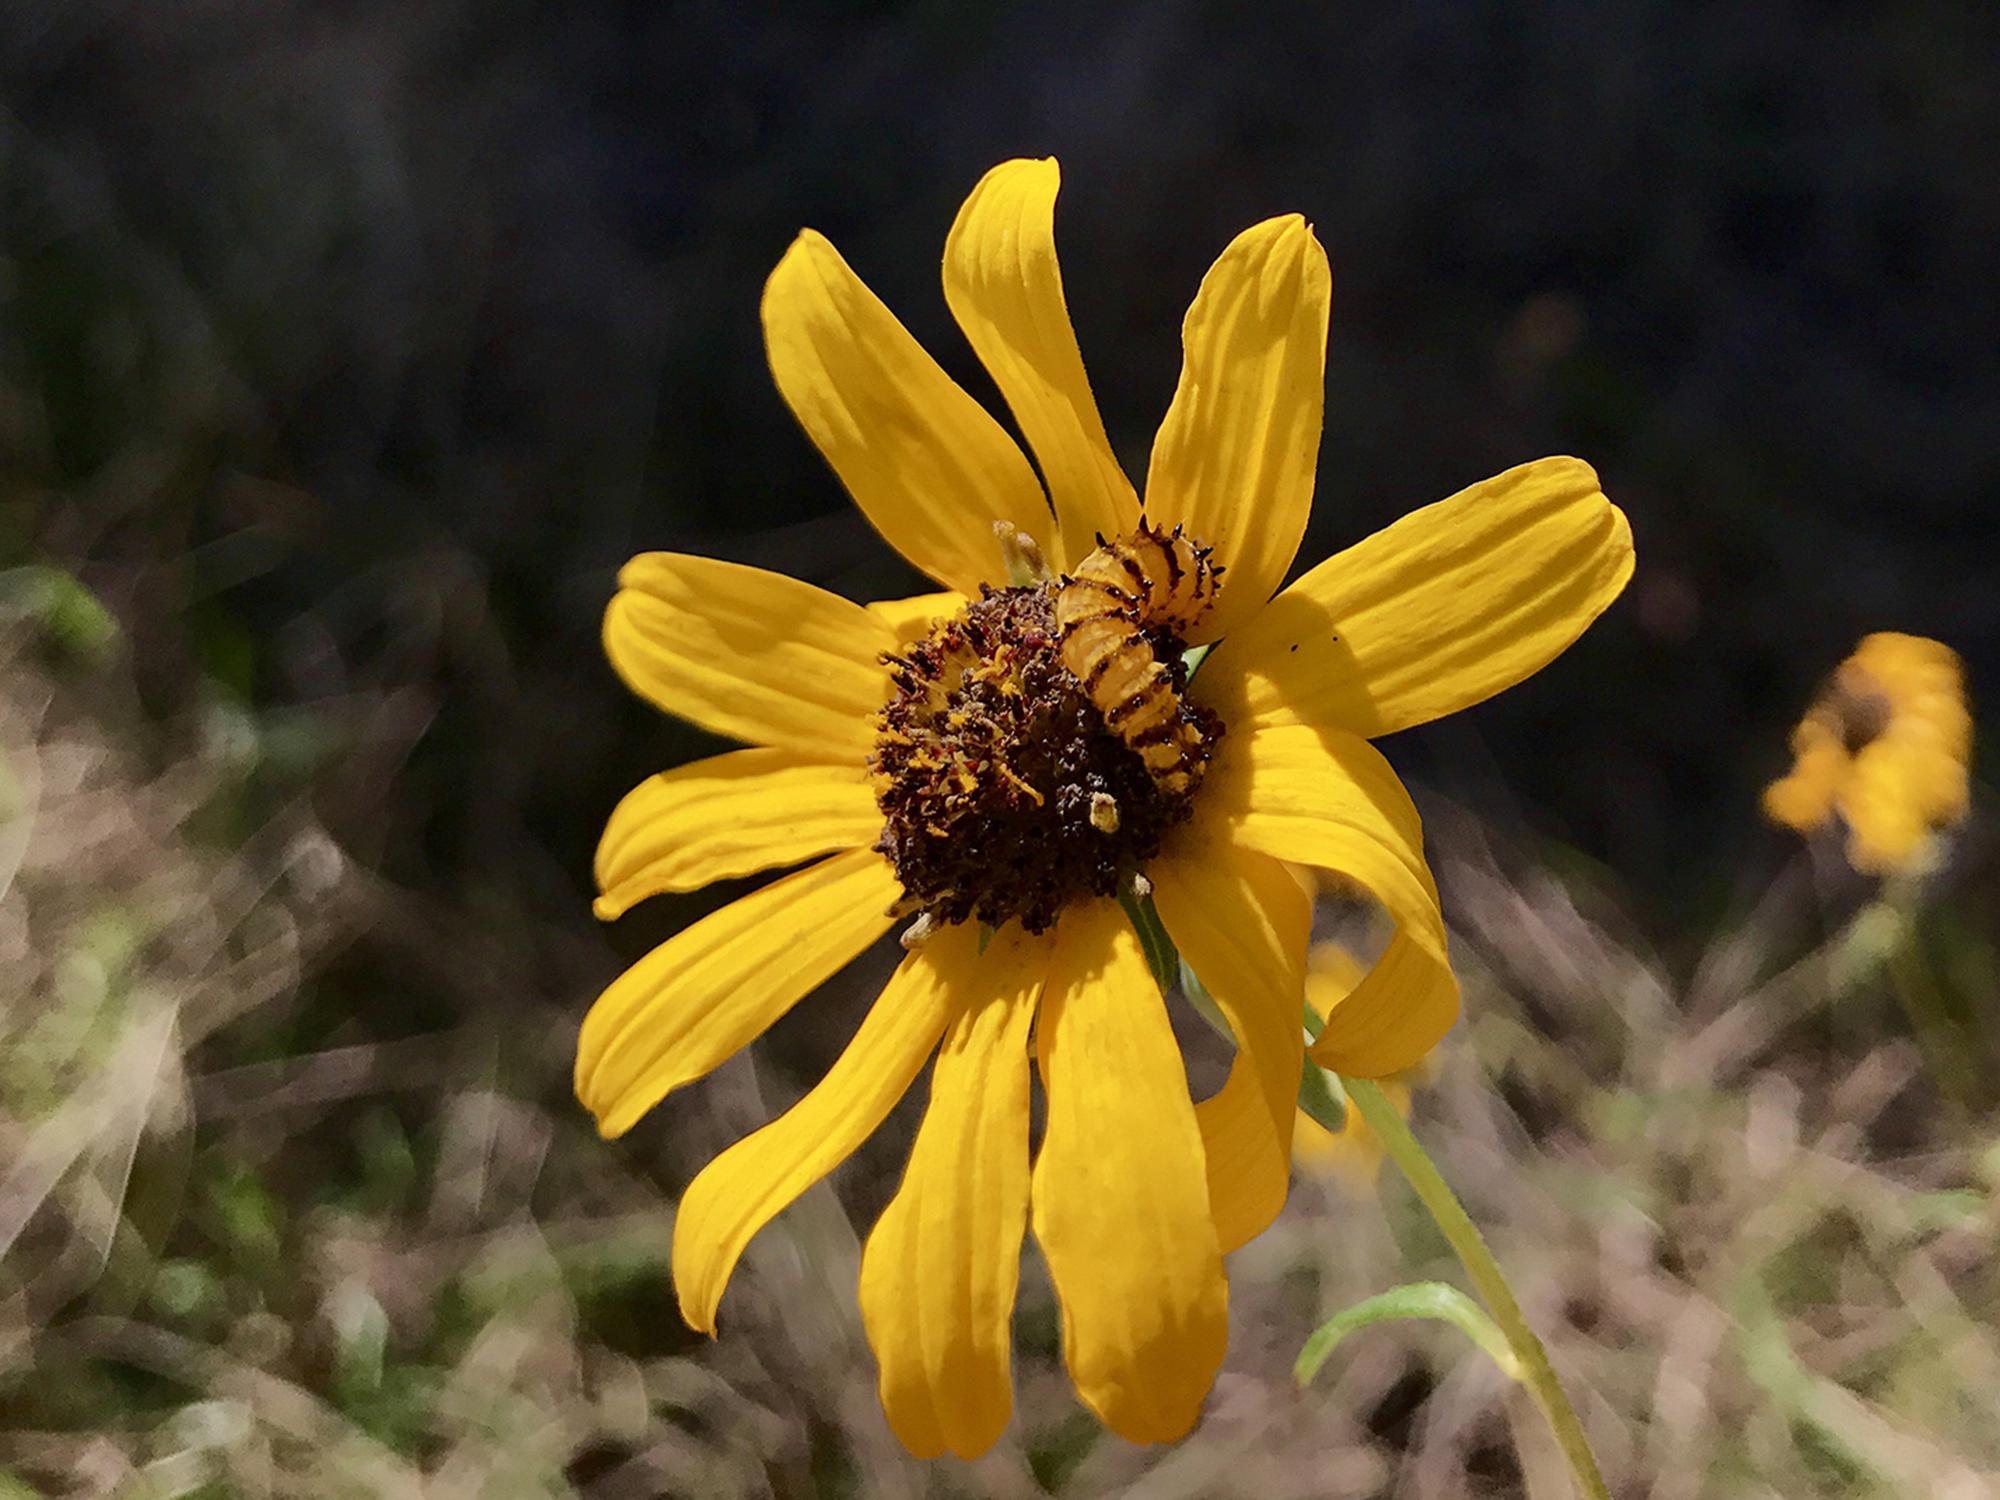 A yellow worm with small brown stripes circling its body crawls over the brown center of a flower surrounded by bright yellow petals.